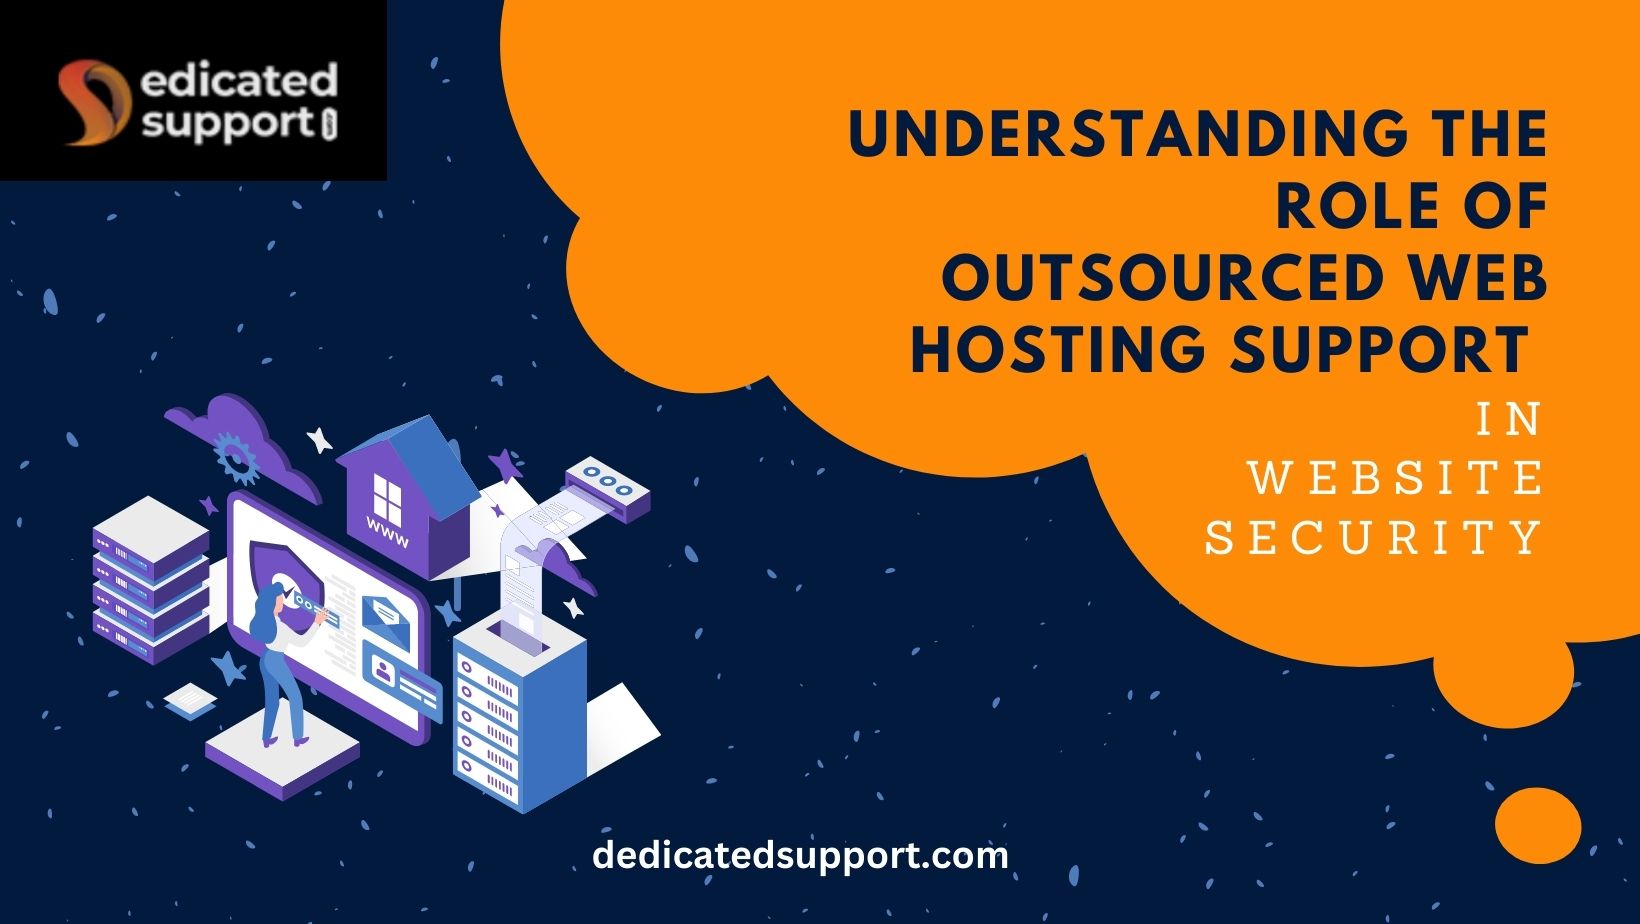 Outsourced webhost support